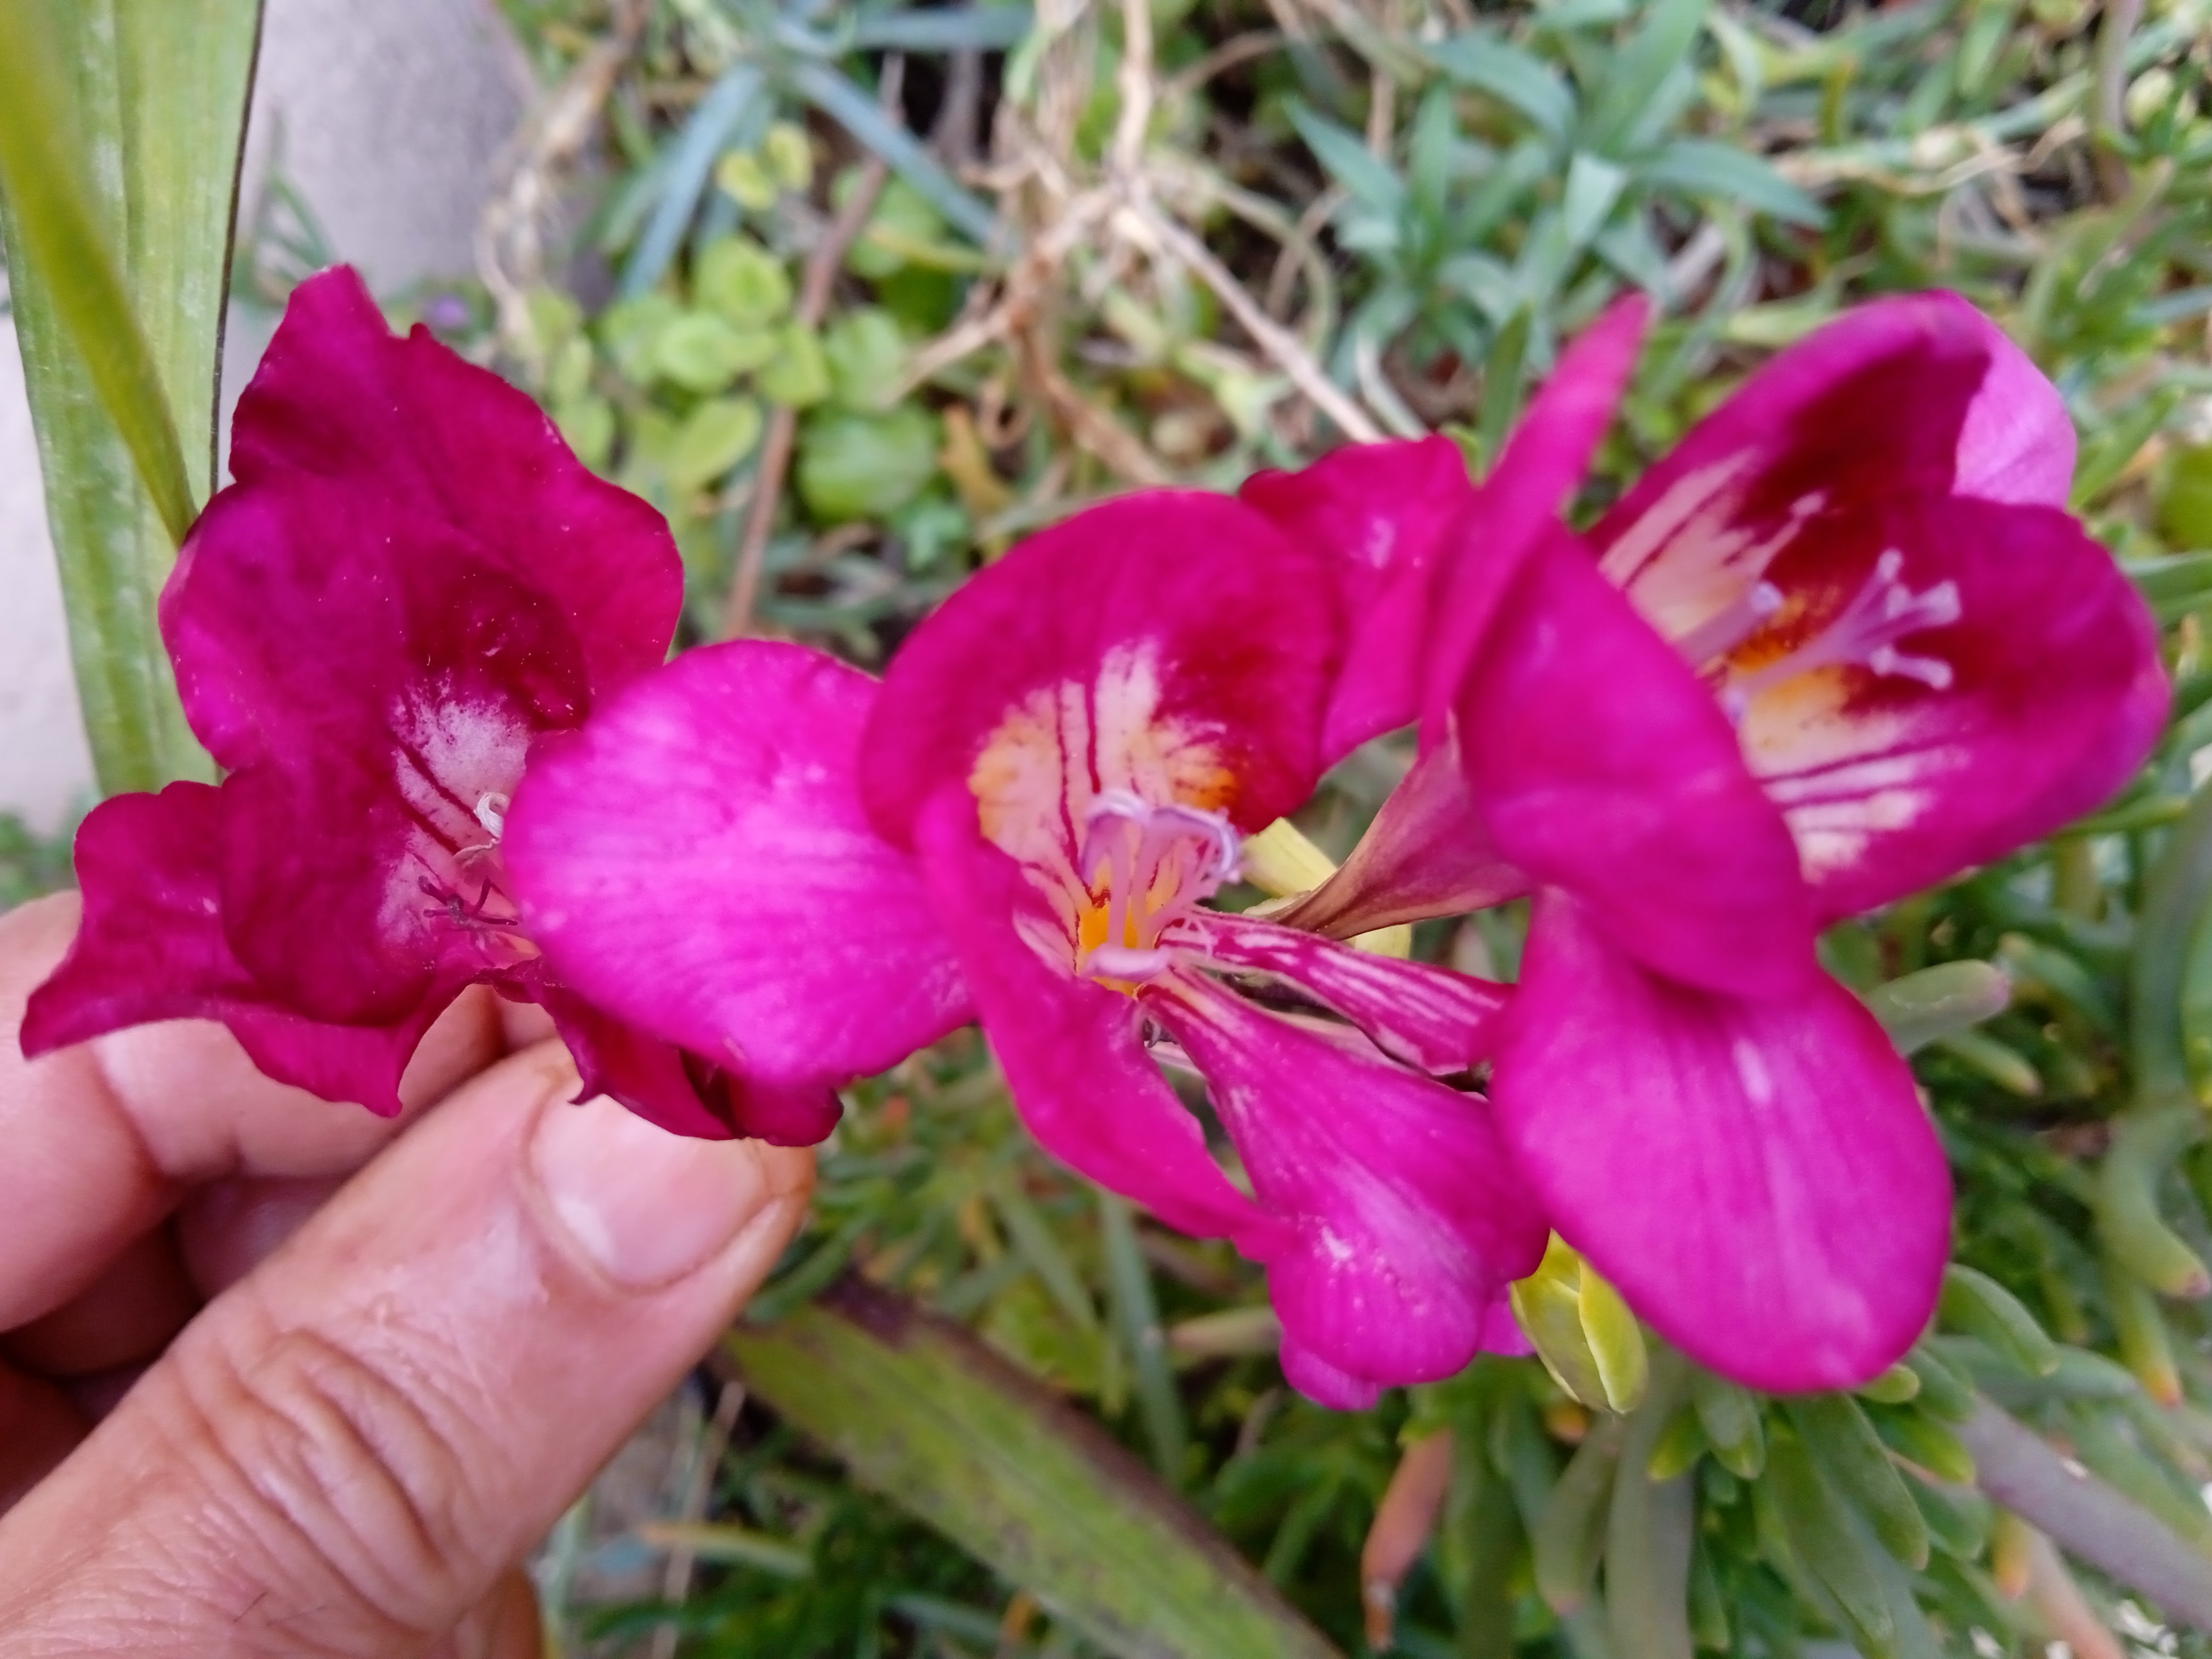 Freesia bloom 10 to 12 weeks after you plant the bulbs "corms", and you can extend the bloom season by planting the bulbs at weekly intervals.